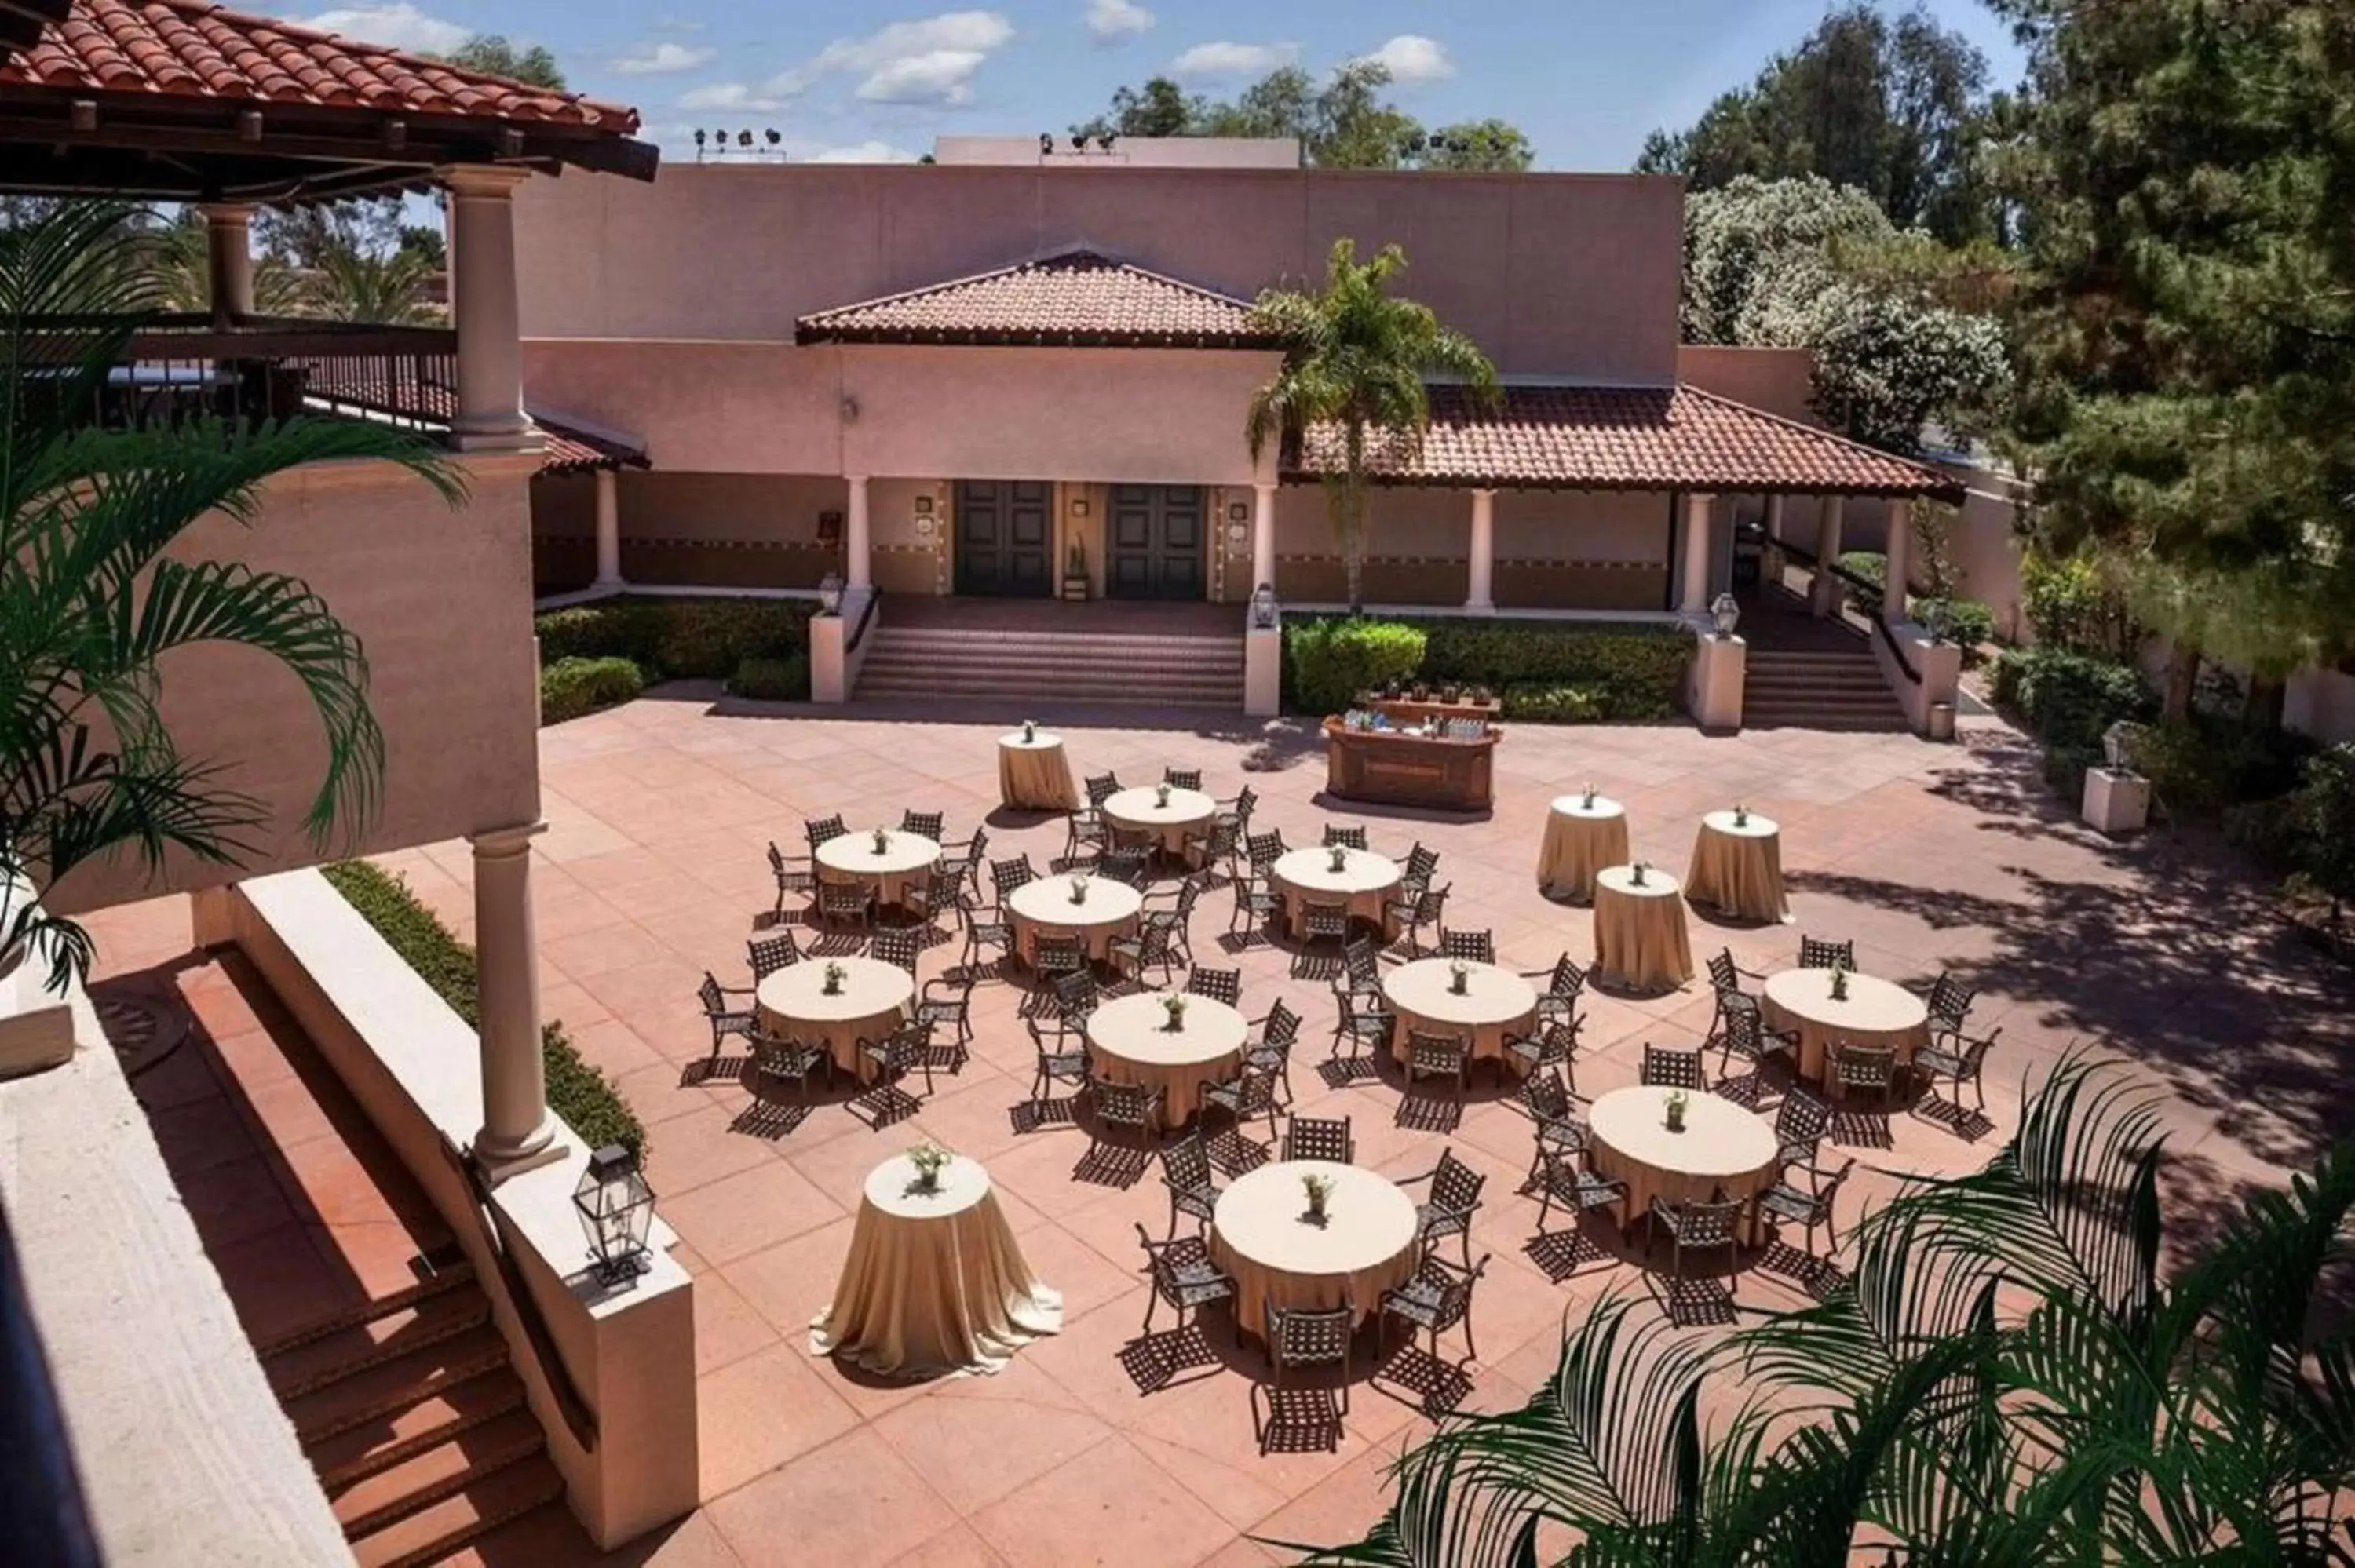 Property building in The Scottsdale Resort at McCormick Ranch